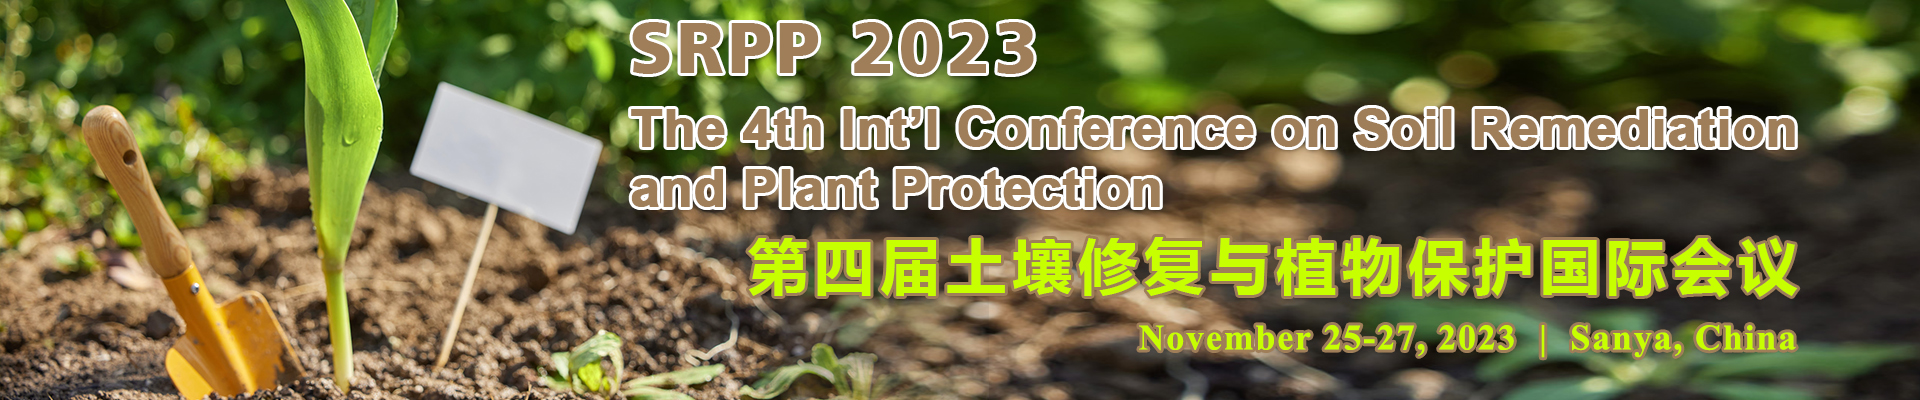 The 4th Int'l Conference on Soil Remediation and Plant Protection (SRPP 2023)